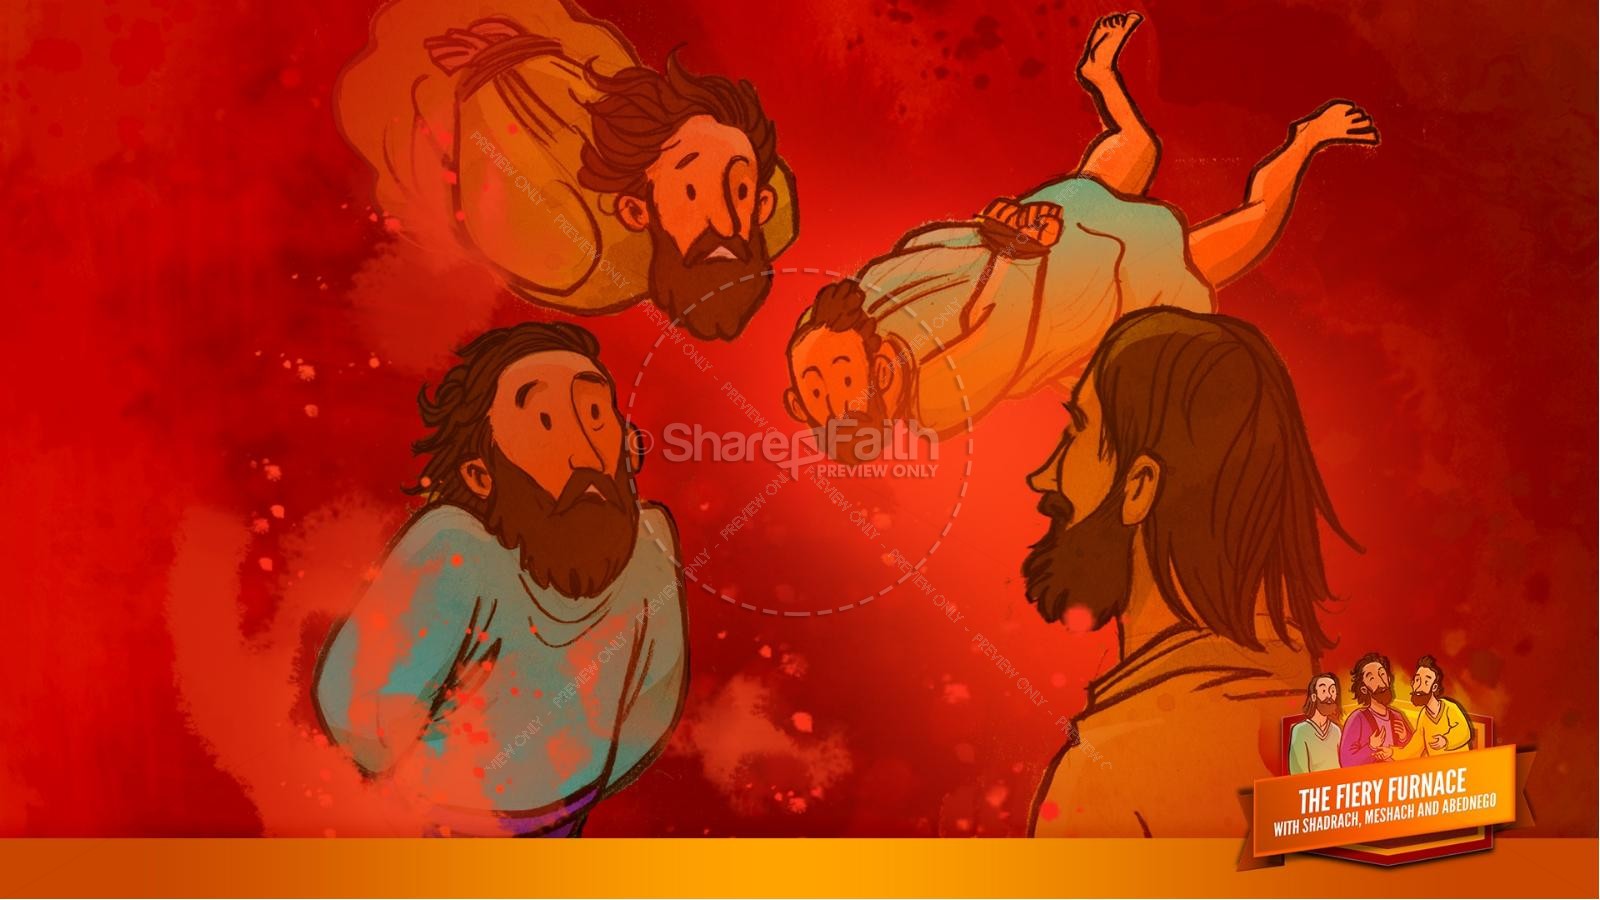 The Fiery Furnace with Shadrach, Meshach and Abednego Kids Bible Story Thumbnail 51